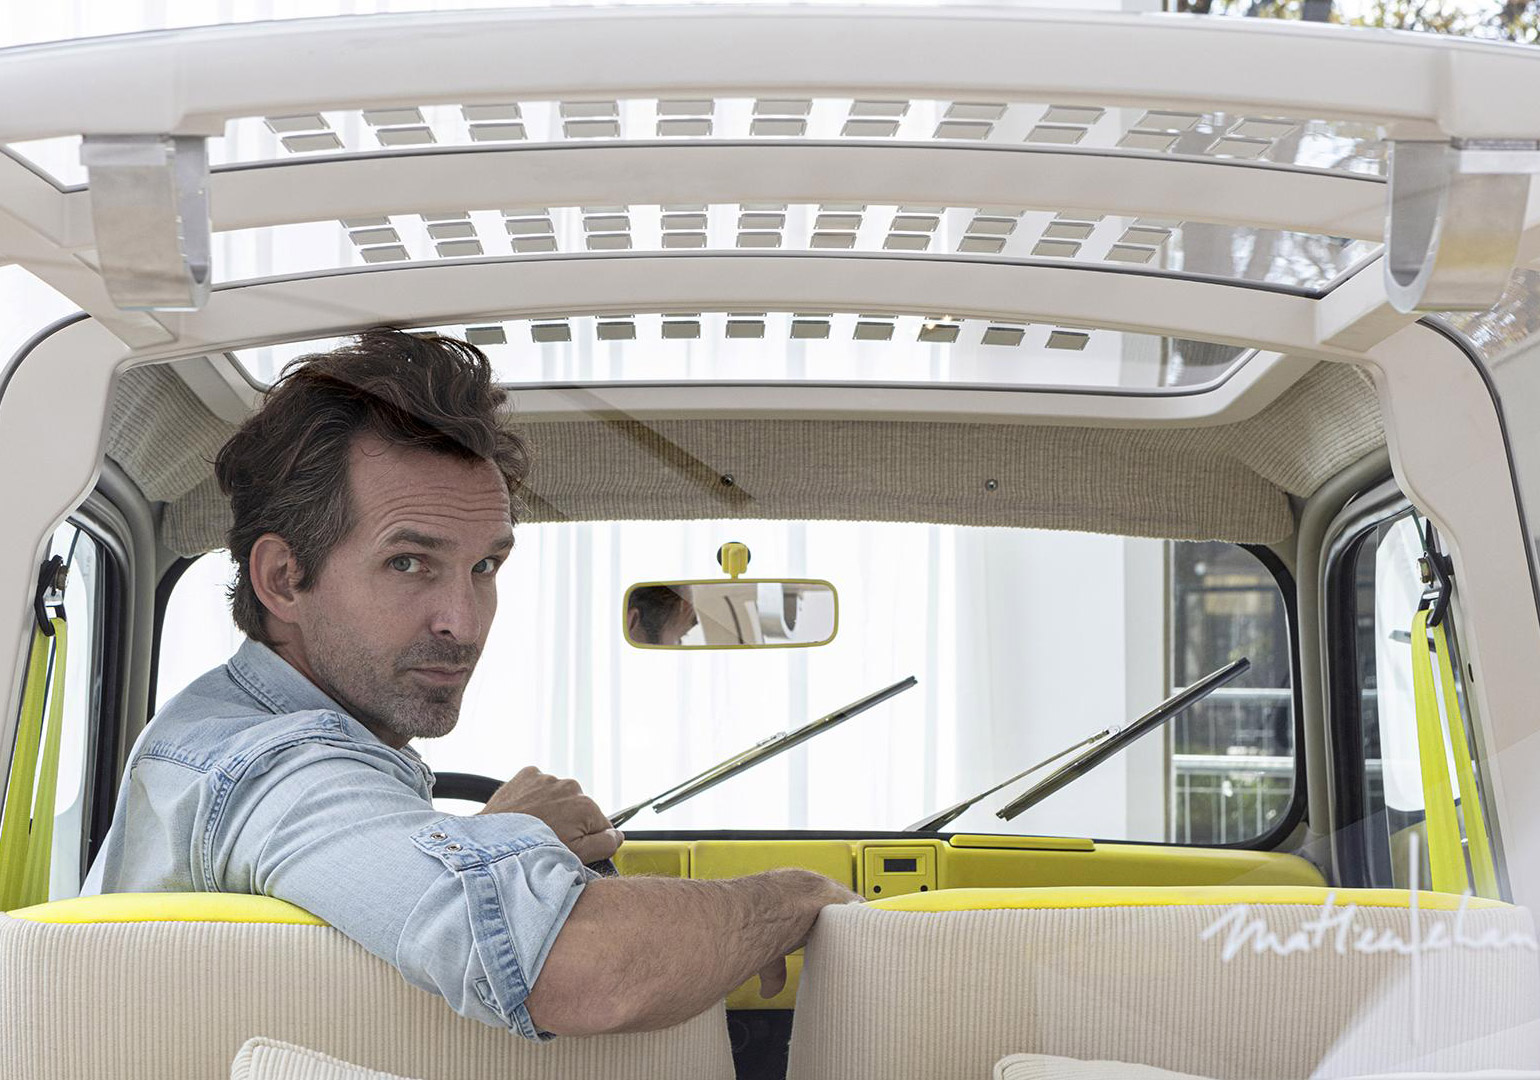 Mathieu Lehanneur Turned Iconic Renault 4L Into Open-Air Hotel Suite